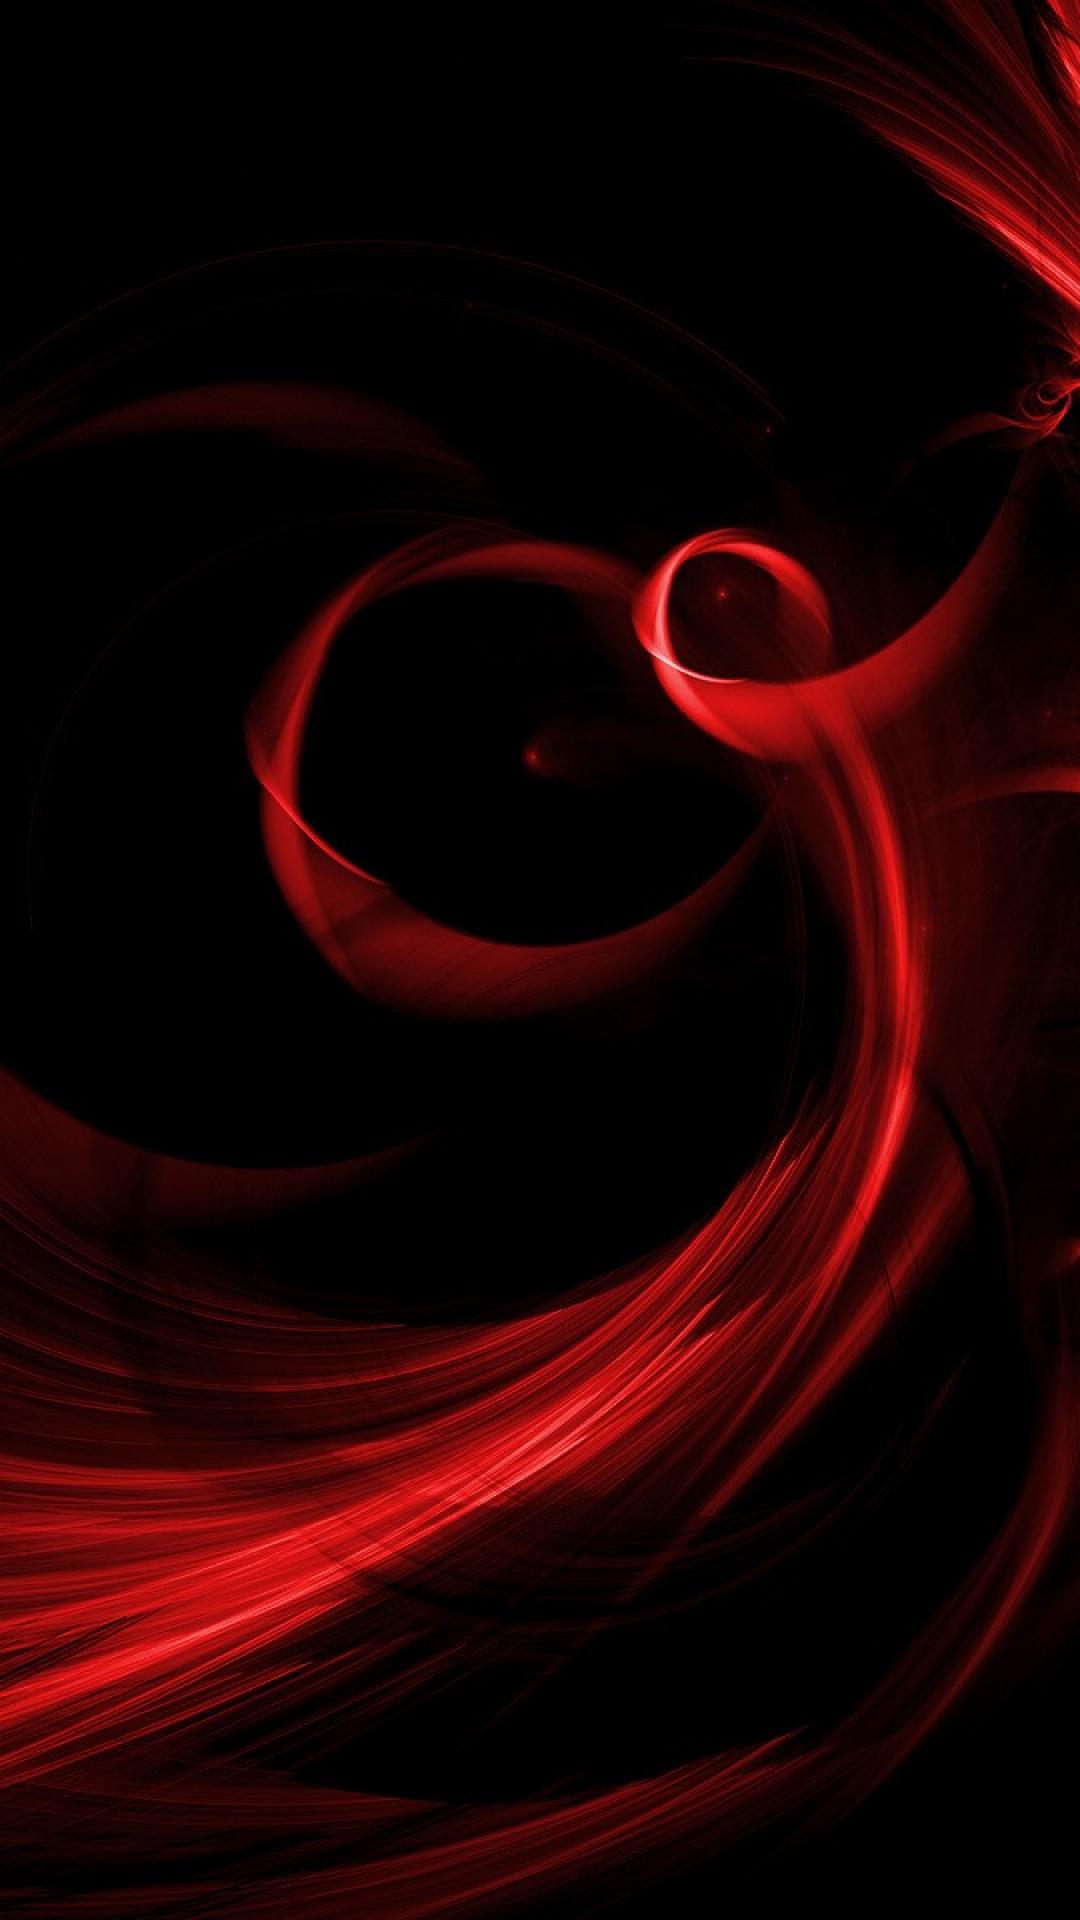 Black And Red For Walls Wallpapers